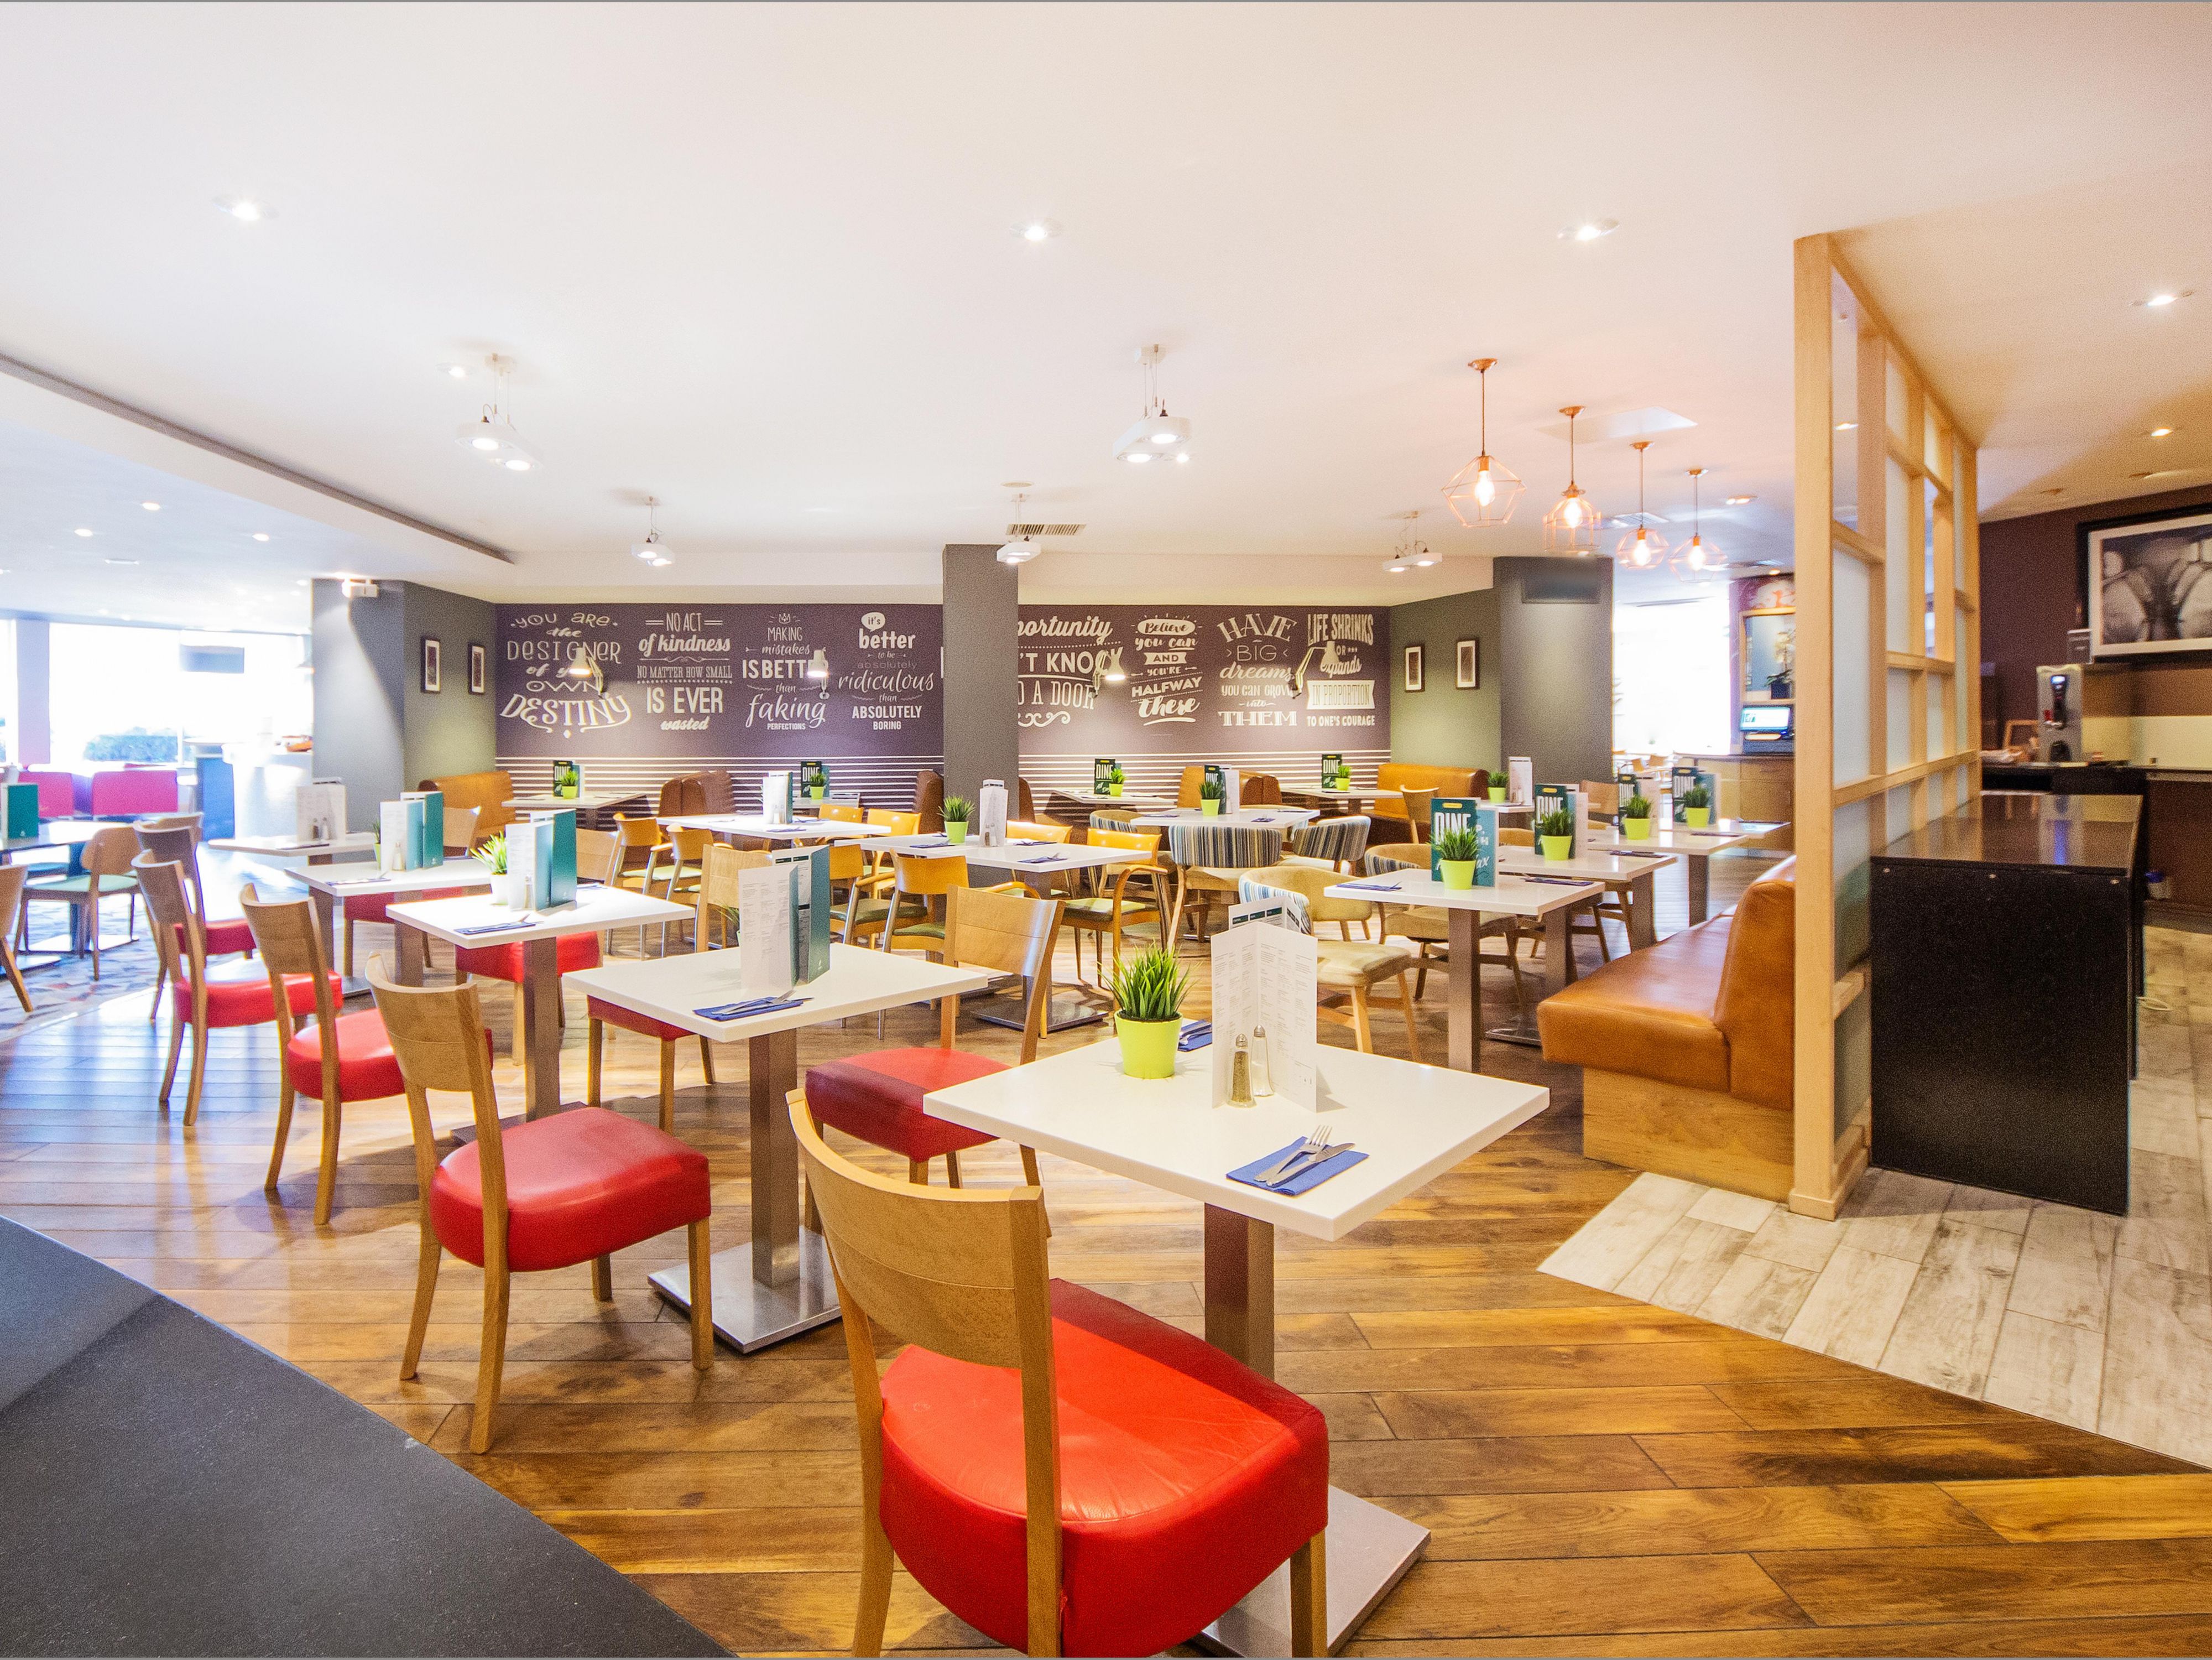 Our modern, stylish Open Lobby at Holiday Inn Reading South offers a warm welcome and exceptional service. The Open Lobby offers all-day dining and serves a selection of dishes sourced from the best British sustainable ingredient.